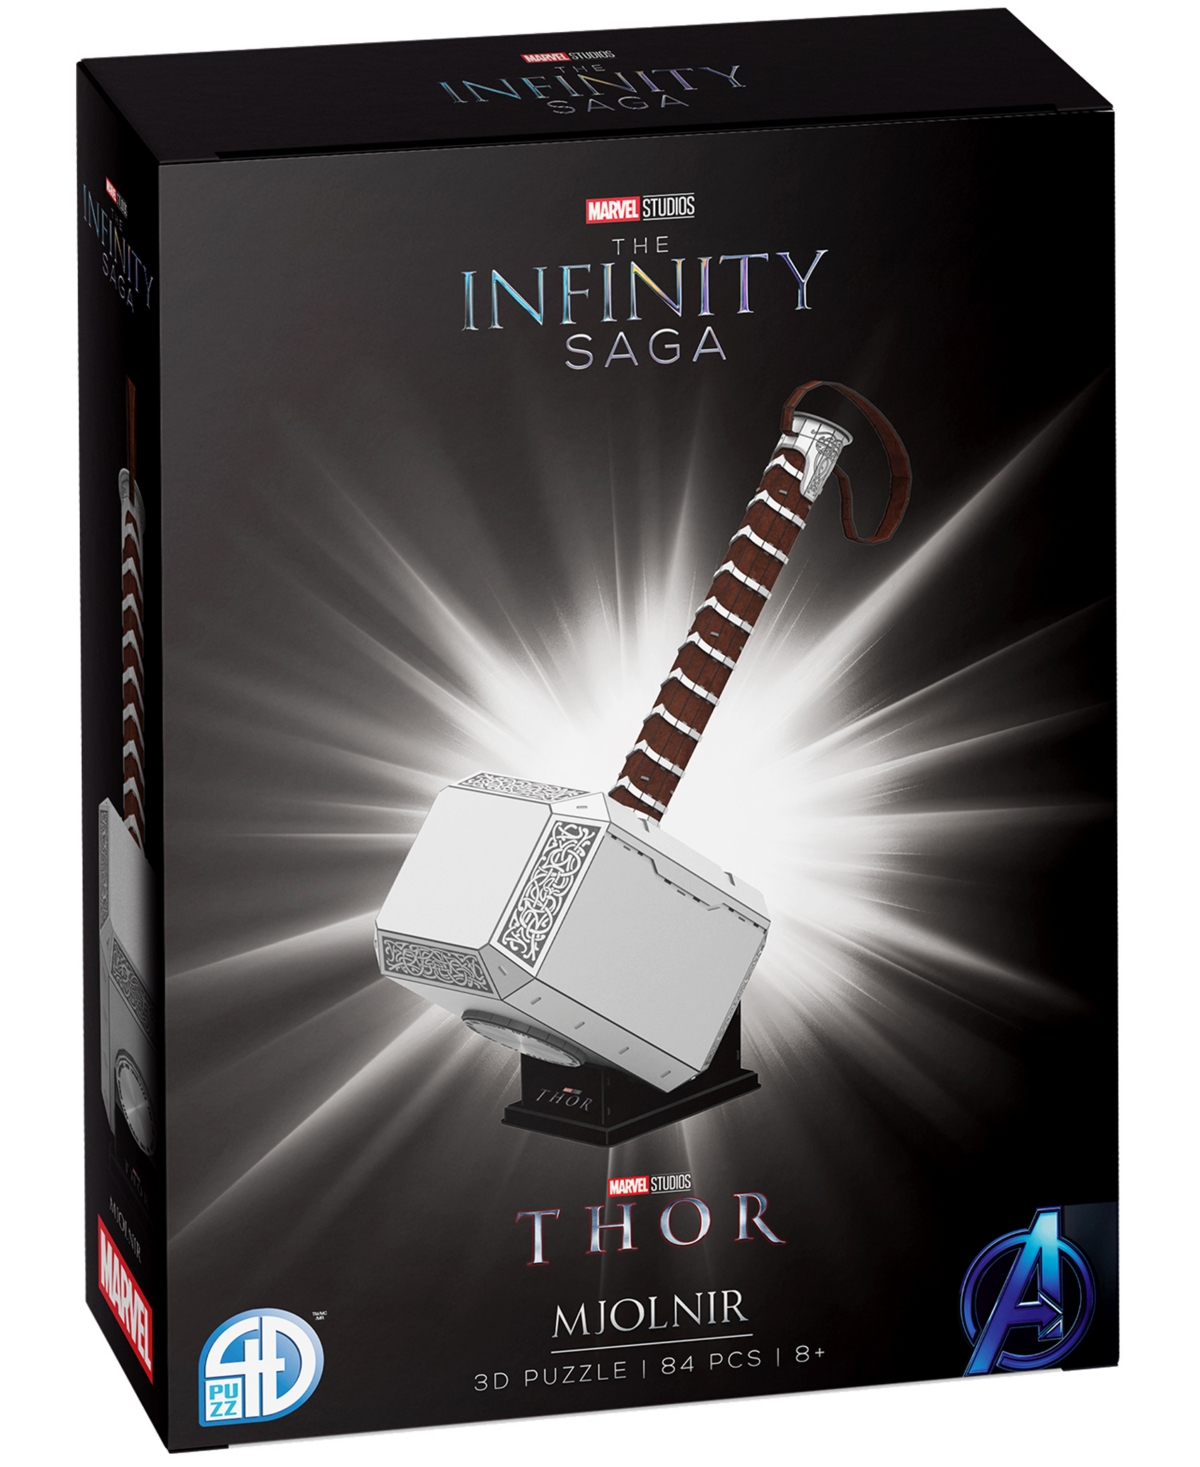 University Games Kids' 4d Cityscape Marvel The Infinity Saga Mjolnir Thor's Hammer 3d Puzzle, 84 Pieces In No Color